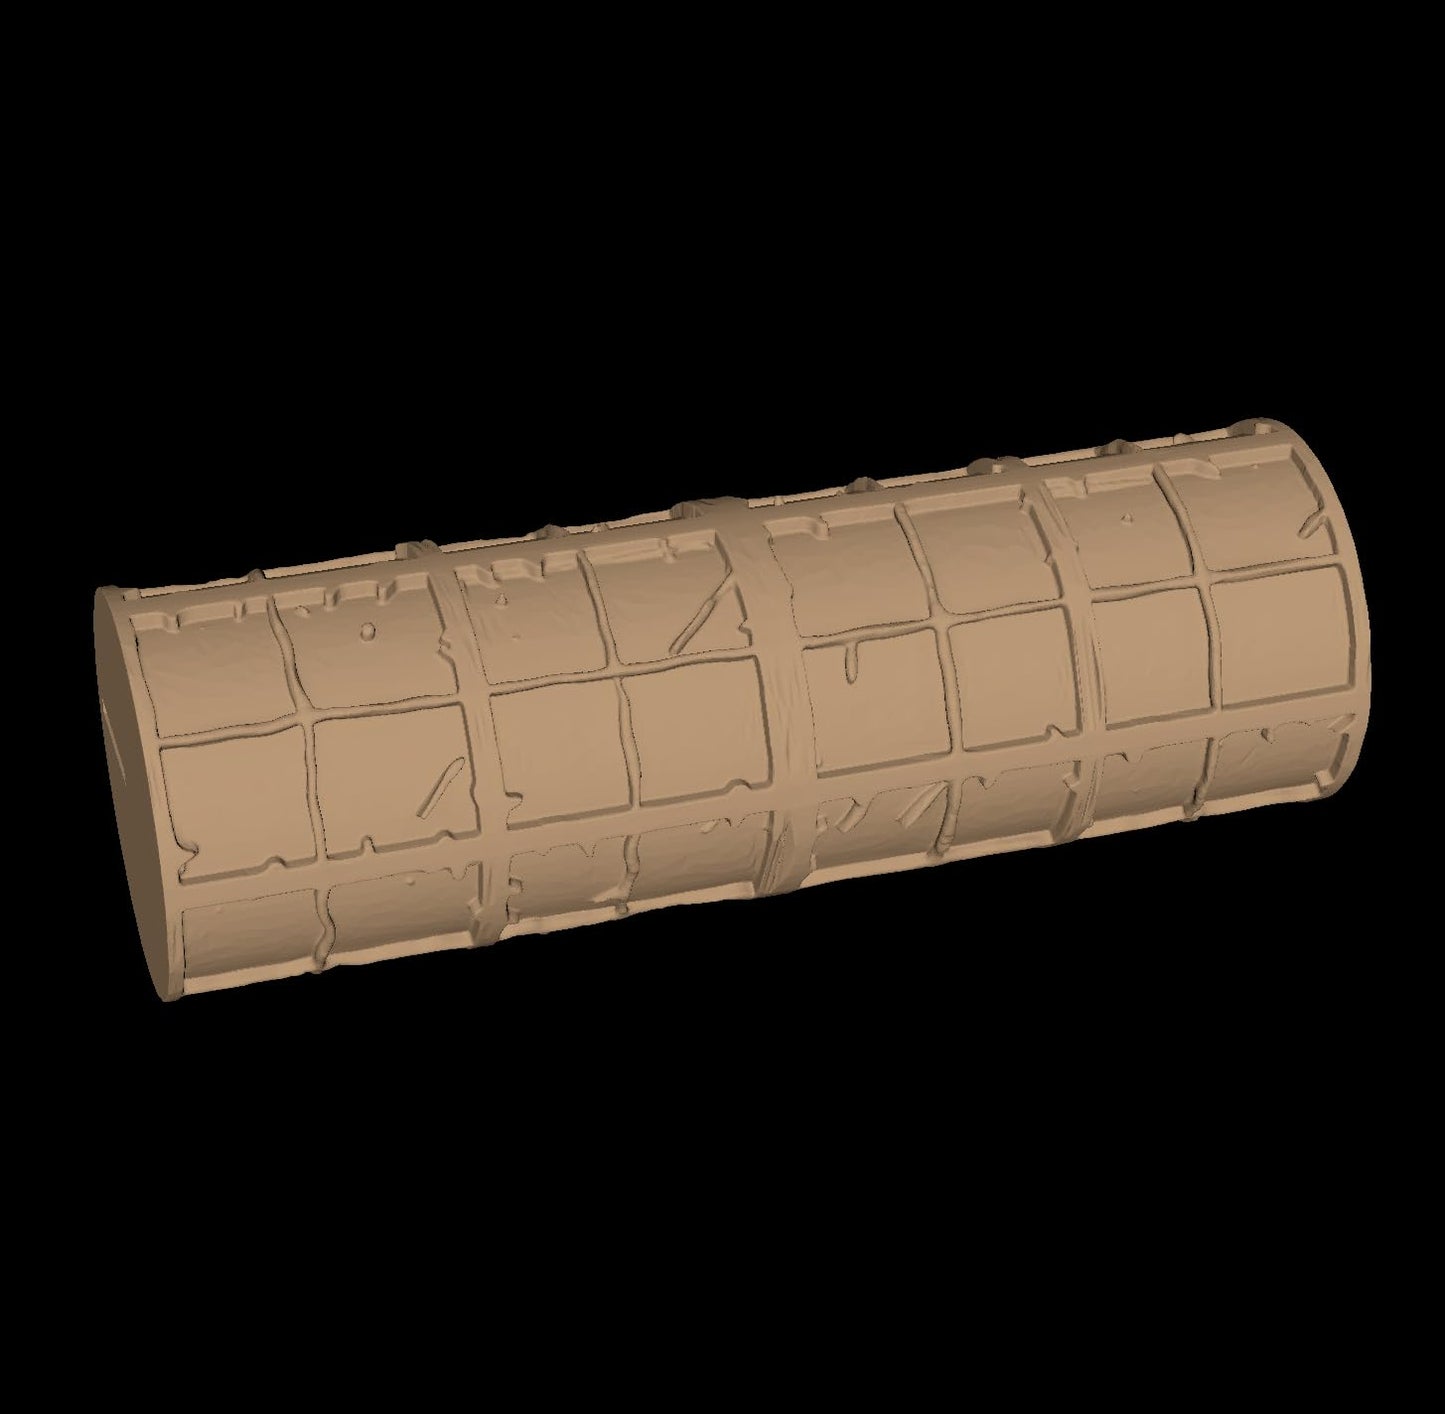 Cobblestone Texture Roller, 4 Inches Tall, Clay texture roller Seamless Design art craft diorama STL Loot Factory